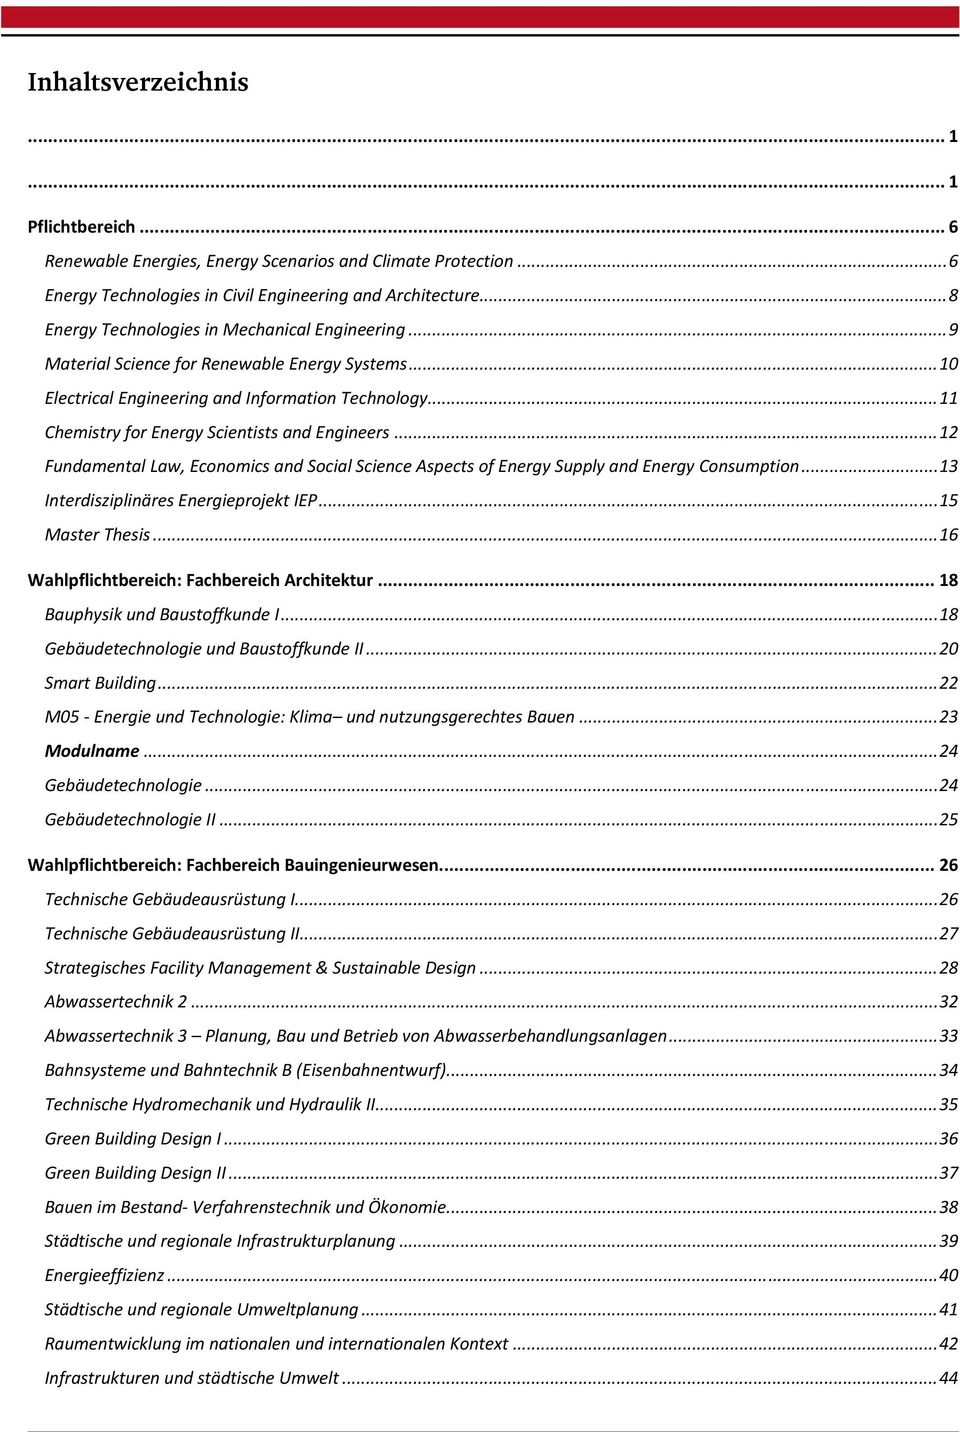 .. 11 Chemistry for Energy Scientists and Engineers... 12 Fundamental Law, Economics and Social Science Aspects of Energy Supply and Energy Consumption... 13 Interdisziplinäres Energieprojekt IEP.